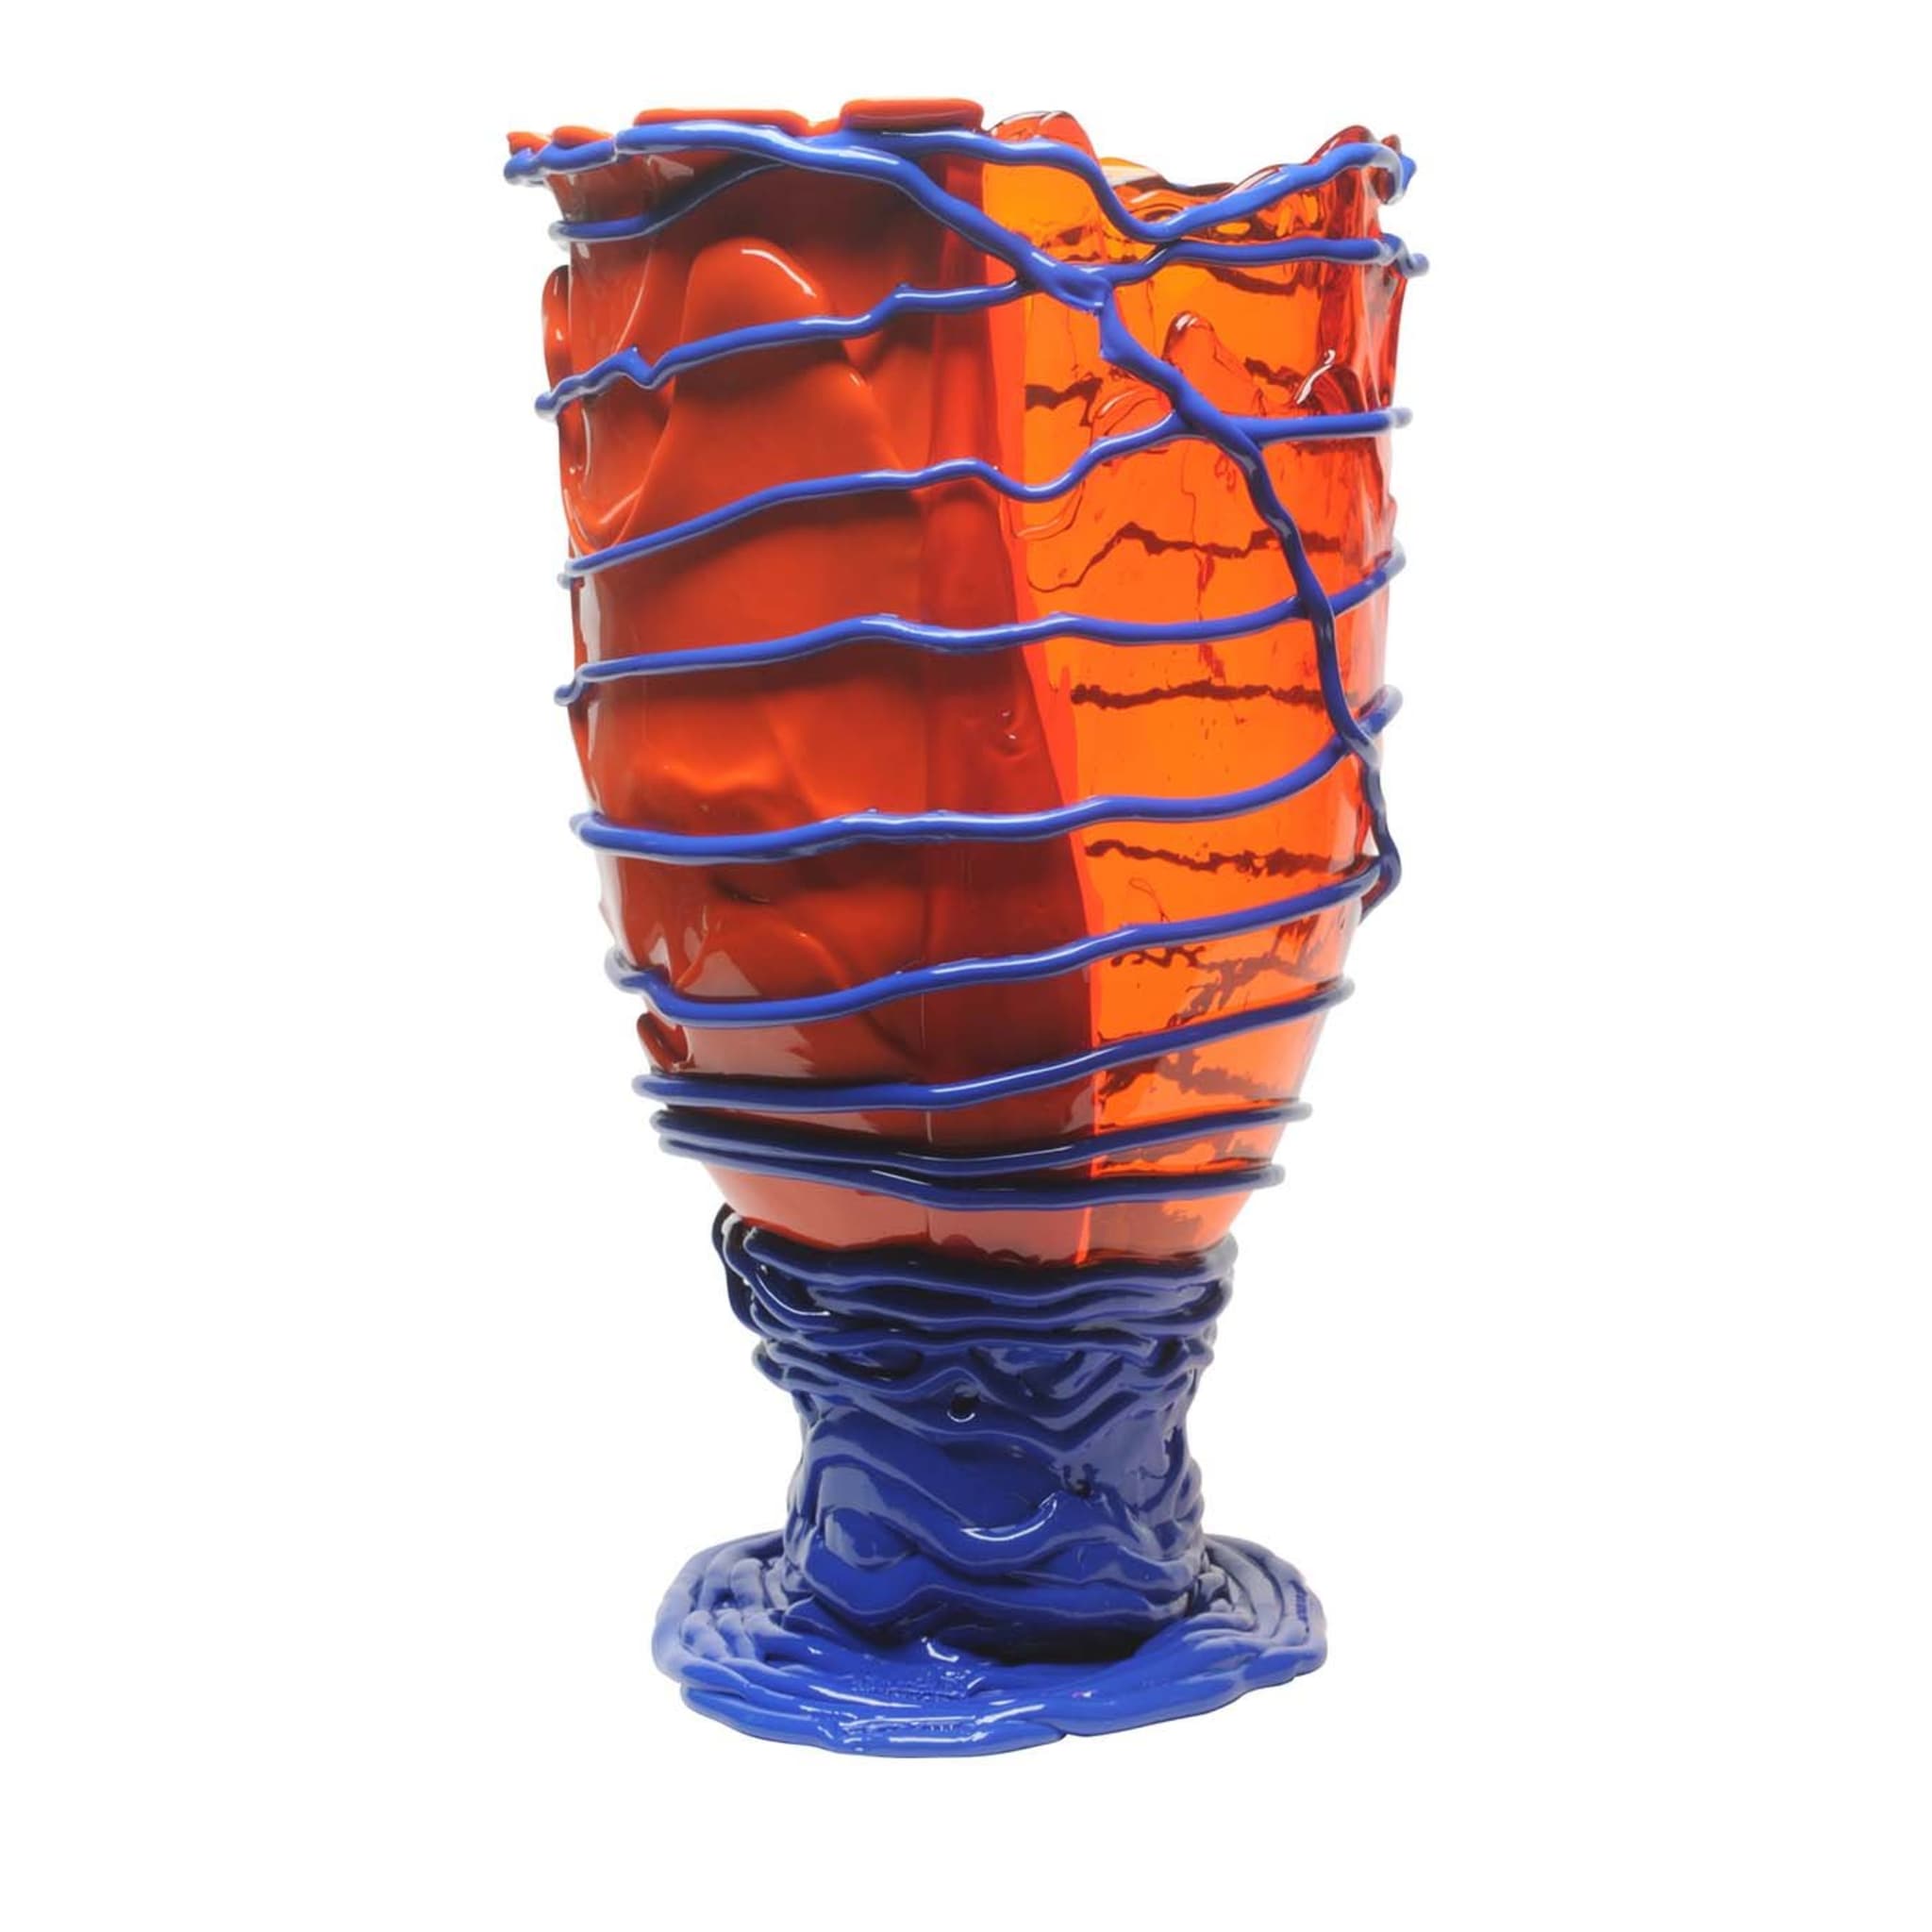 Pompitu II Extracolor Extra Large Vase by Gaetano Pesce - Vue principale